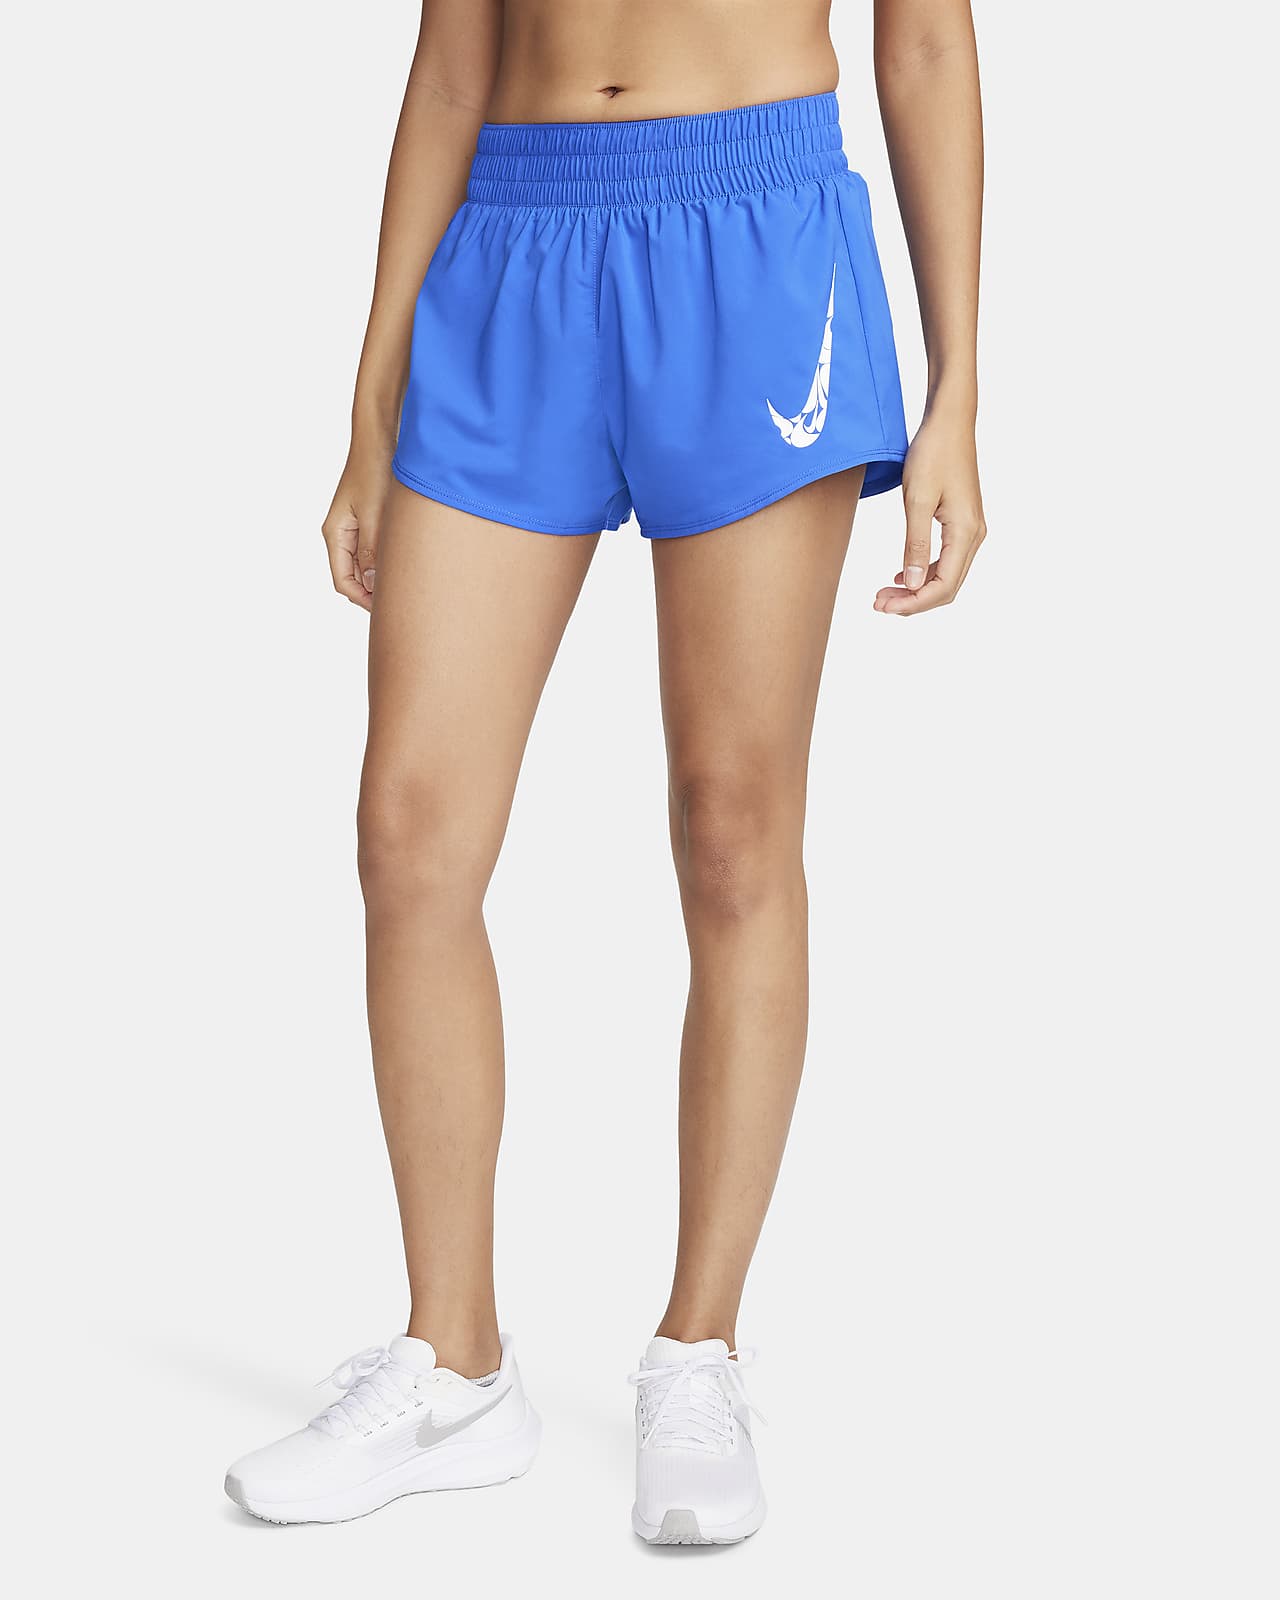 Nike One Women's Dri-FIT Ultra High-Waisted 8cm (approx.) Brief-Lined Shorts.  Nike CA